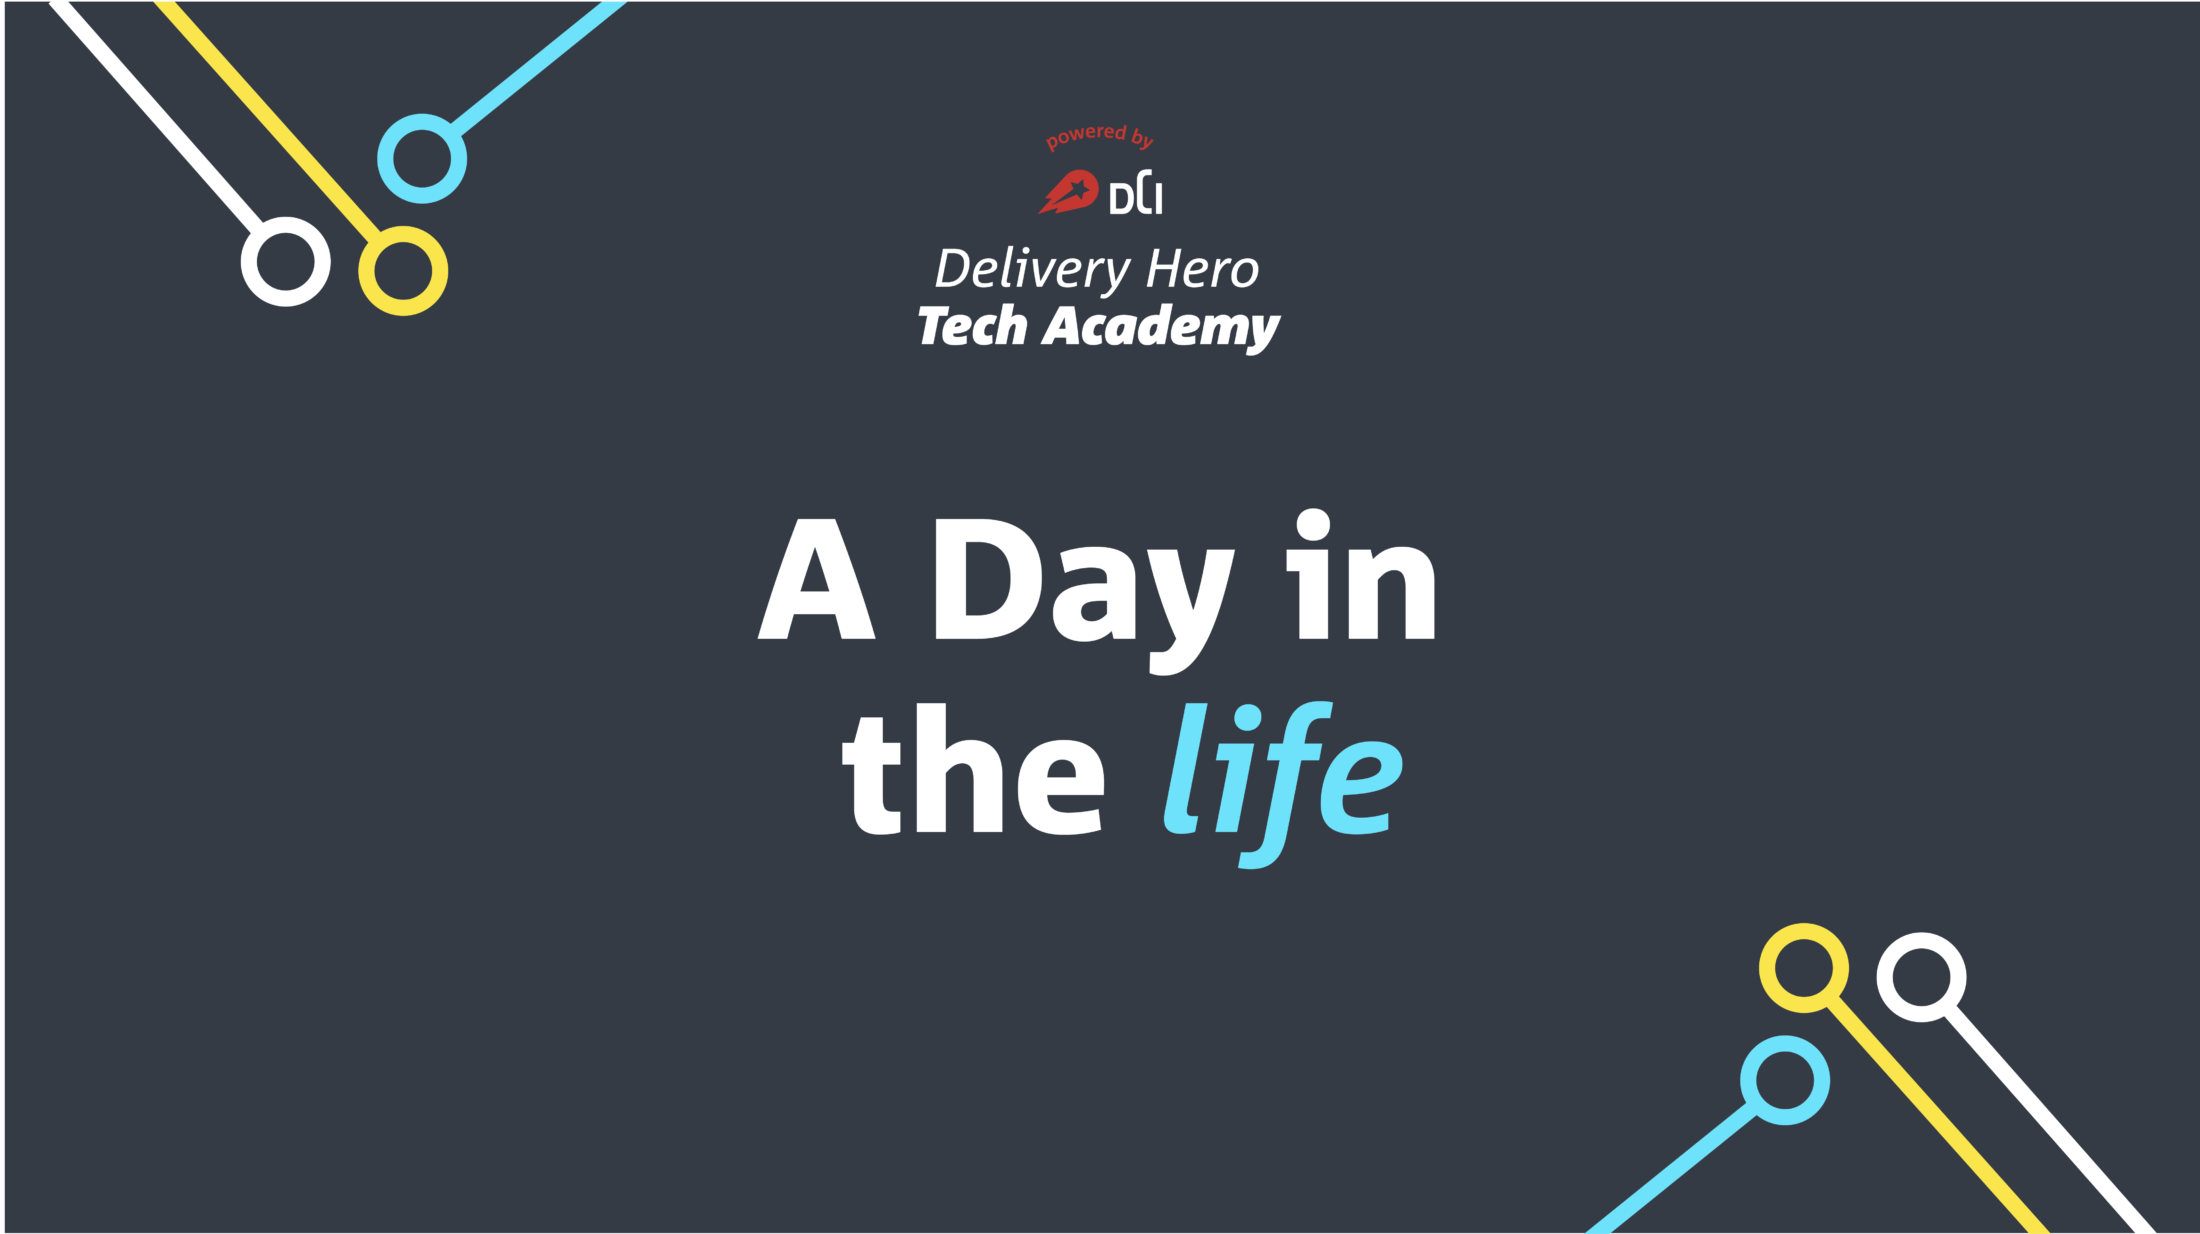 Coding Heroes: A day at the Delivery Hero Tech Academy